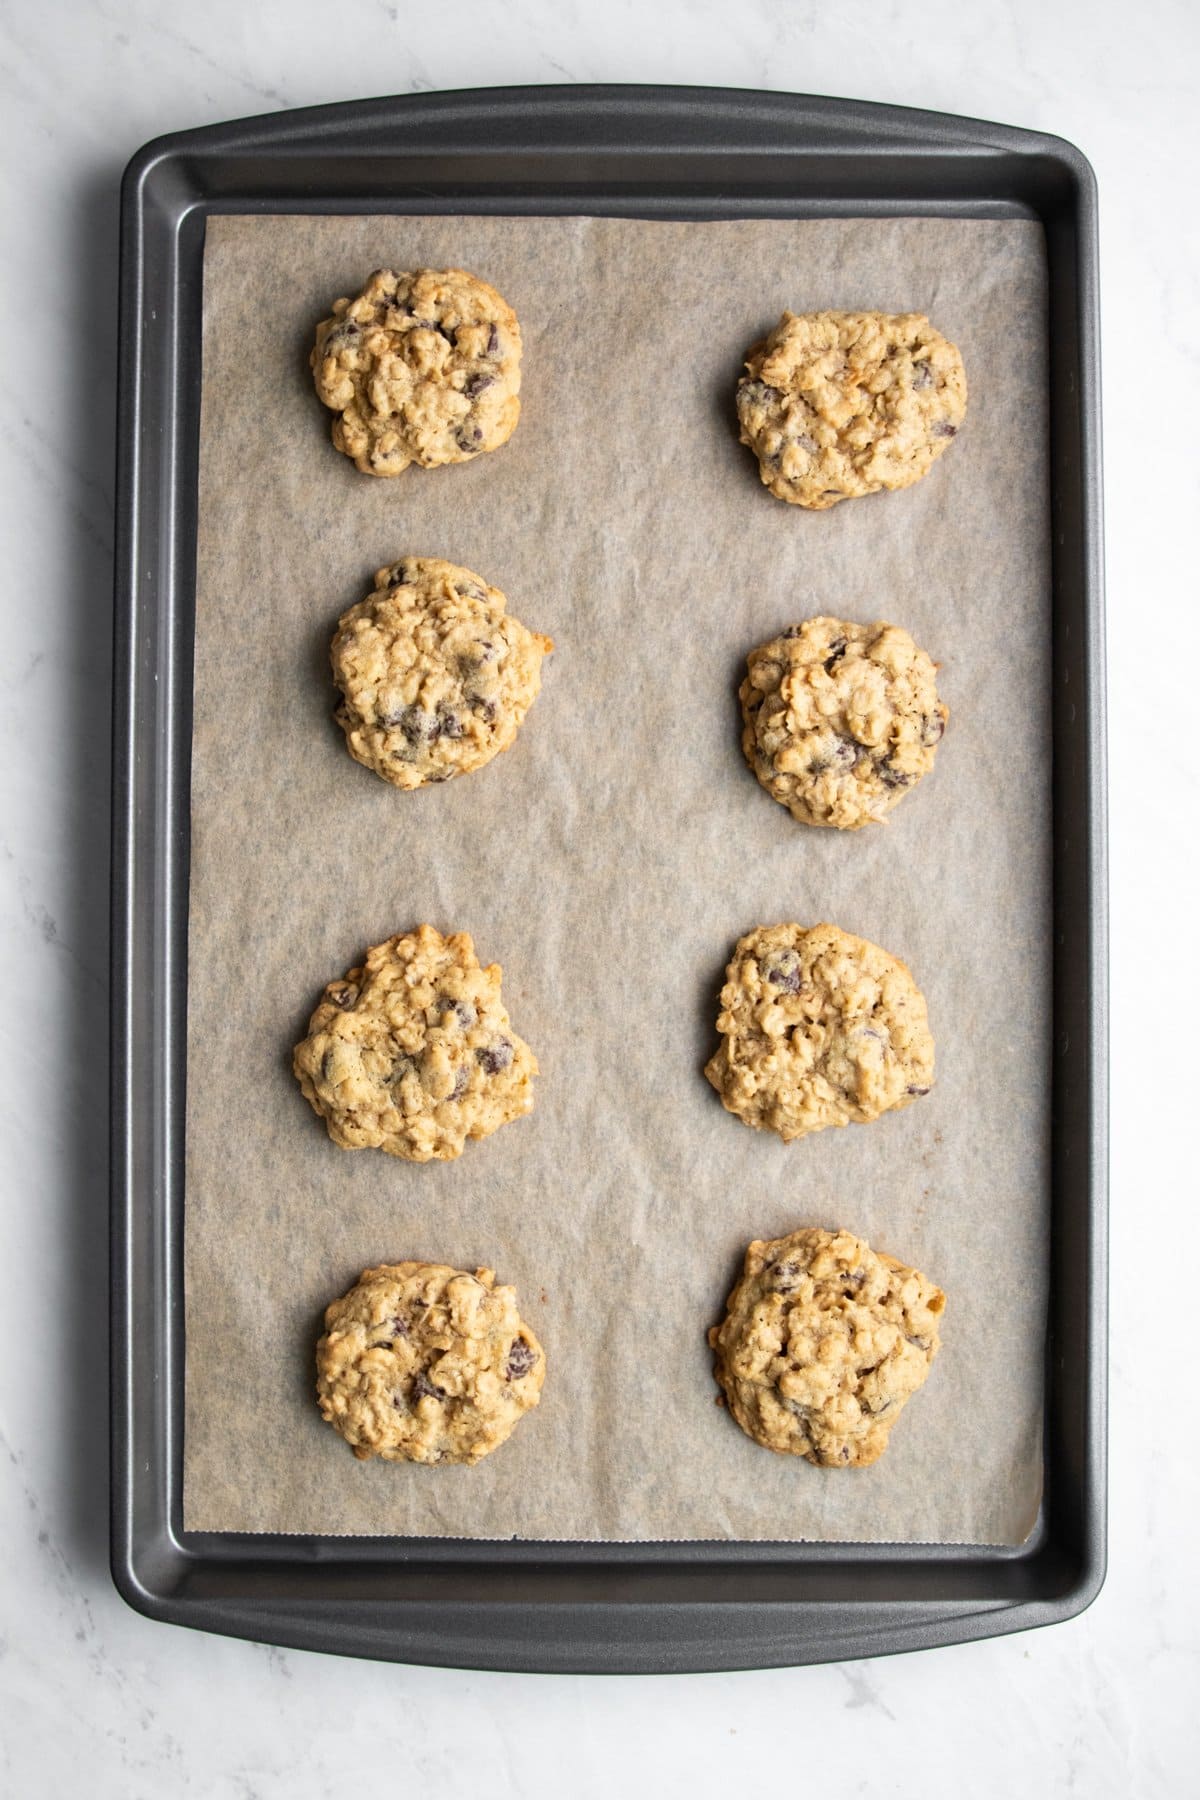 Eight baked low FODMAP oatmeal chocolate chip cookies on a baking sheet lined with parchment paper.